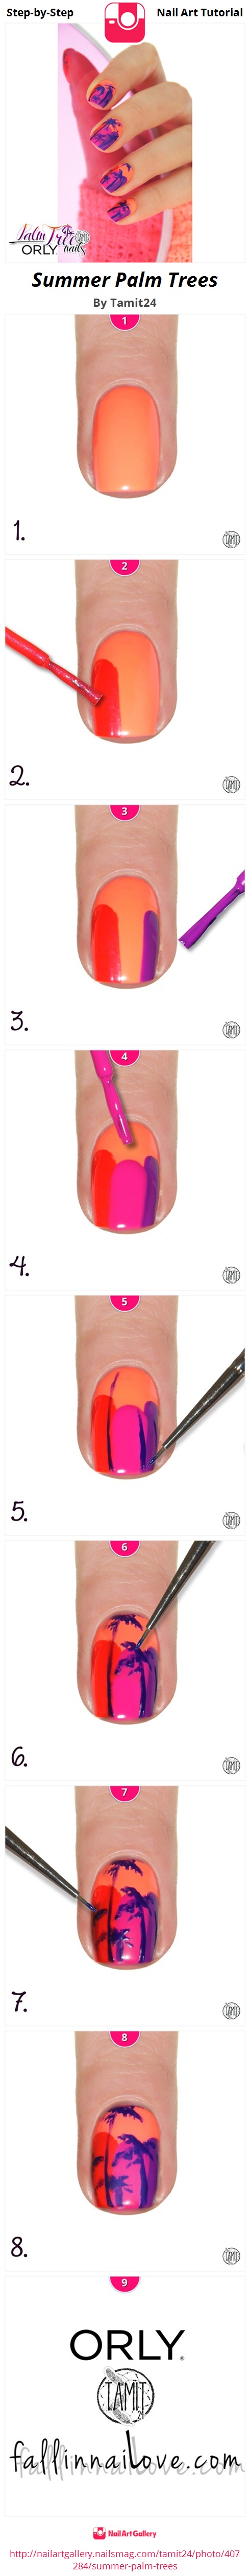 Summer Palm Trees - Nail Art Gallery